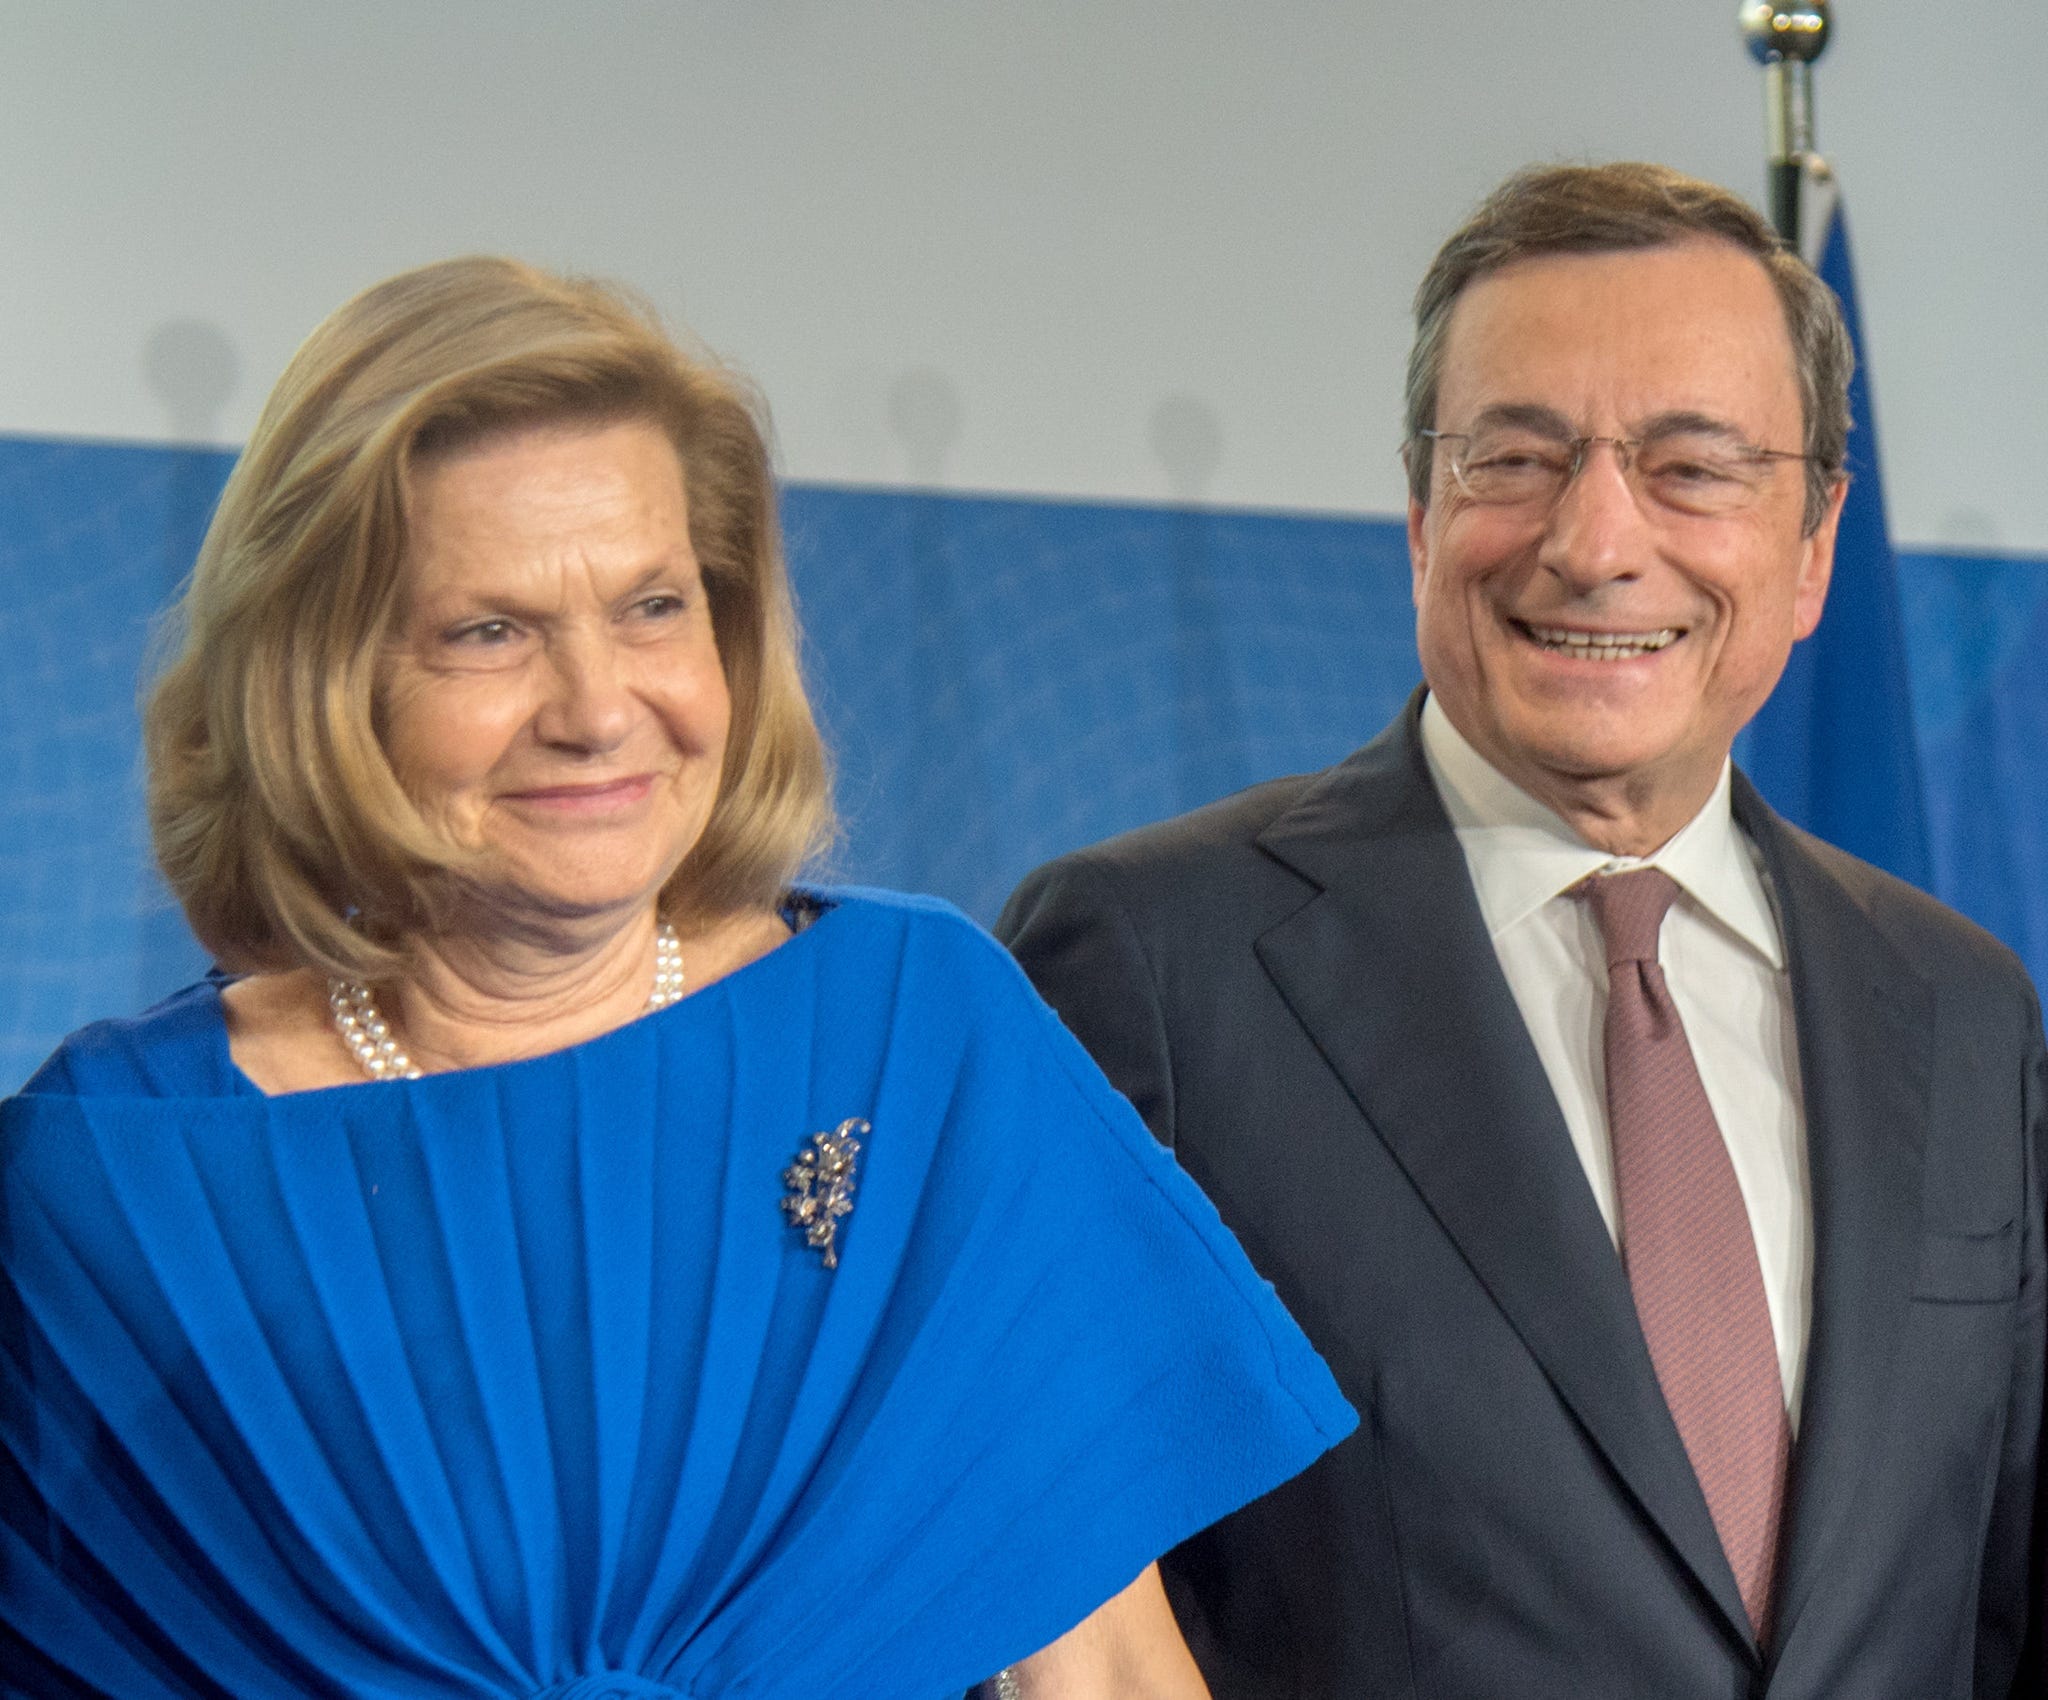 frankfurt am main, germany   october 28 mario draghi, outgoing president of the european central bank ecb and his wife serena draghi during a farewell ceremony for mario draghi at the headquarters of the european central bank on october 28, 2019 in frankfurt am main, germany photo by bernd kammerer   pool  getty images